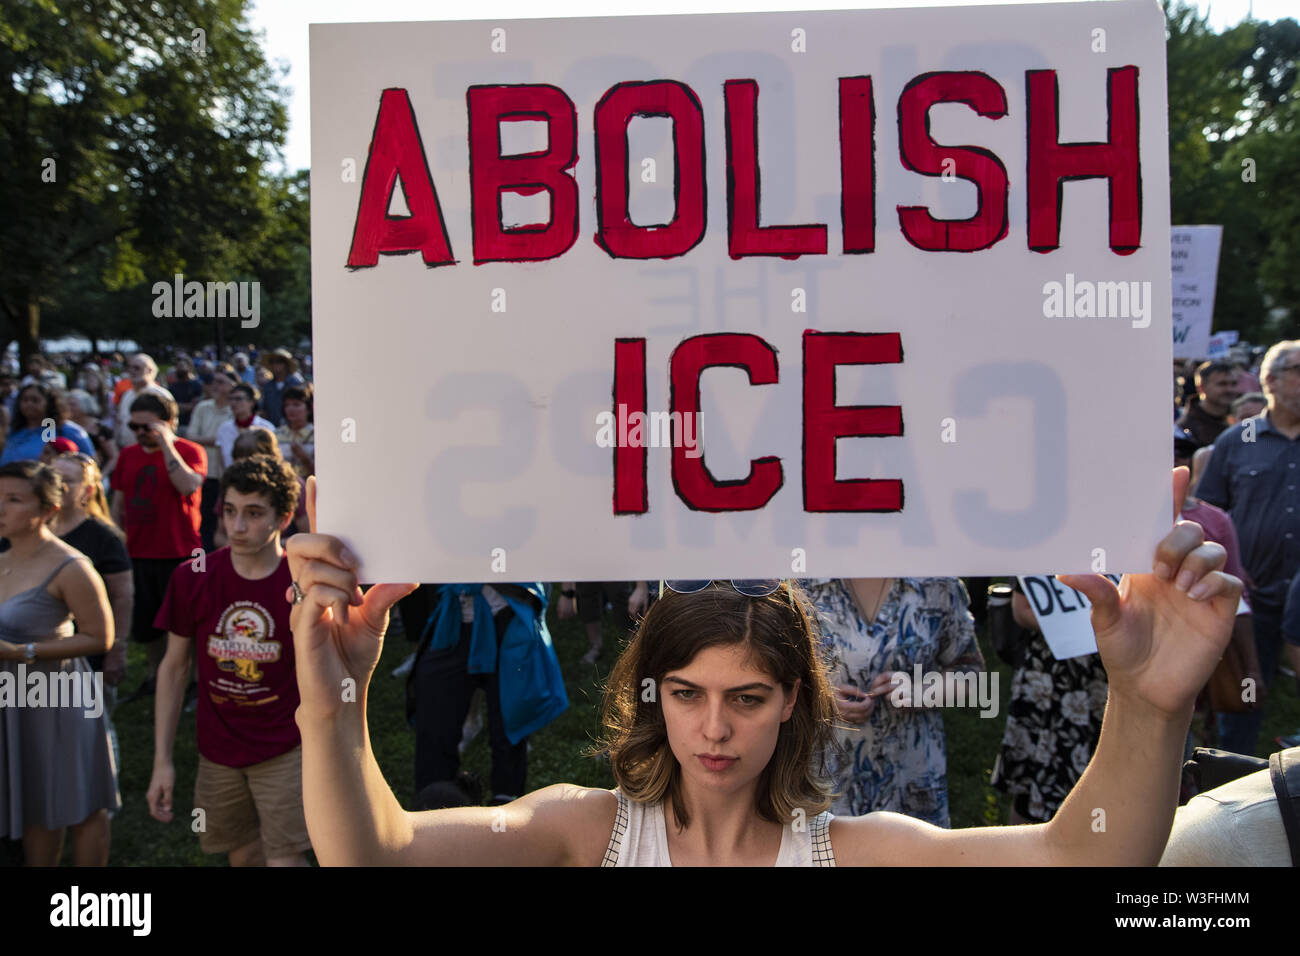 July 12, 2019 - Washington, District of Columbia, United States of America - A demonstrator holds an ''Abolish ICE'' protest sign during a vigil protesting treatment of migrant children by U.S. Immigration and Customs Enforcement (ICE) held near the White House in Lafayette Park in Washington, D.C. on July 12, 2019. (Credit Image: © Alex Edelman/ZUMA Wire) Stock Photo